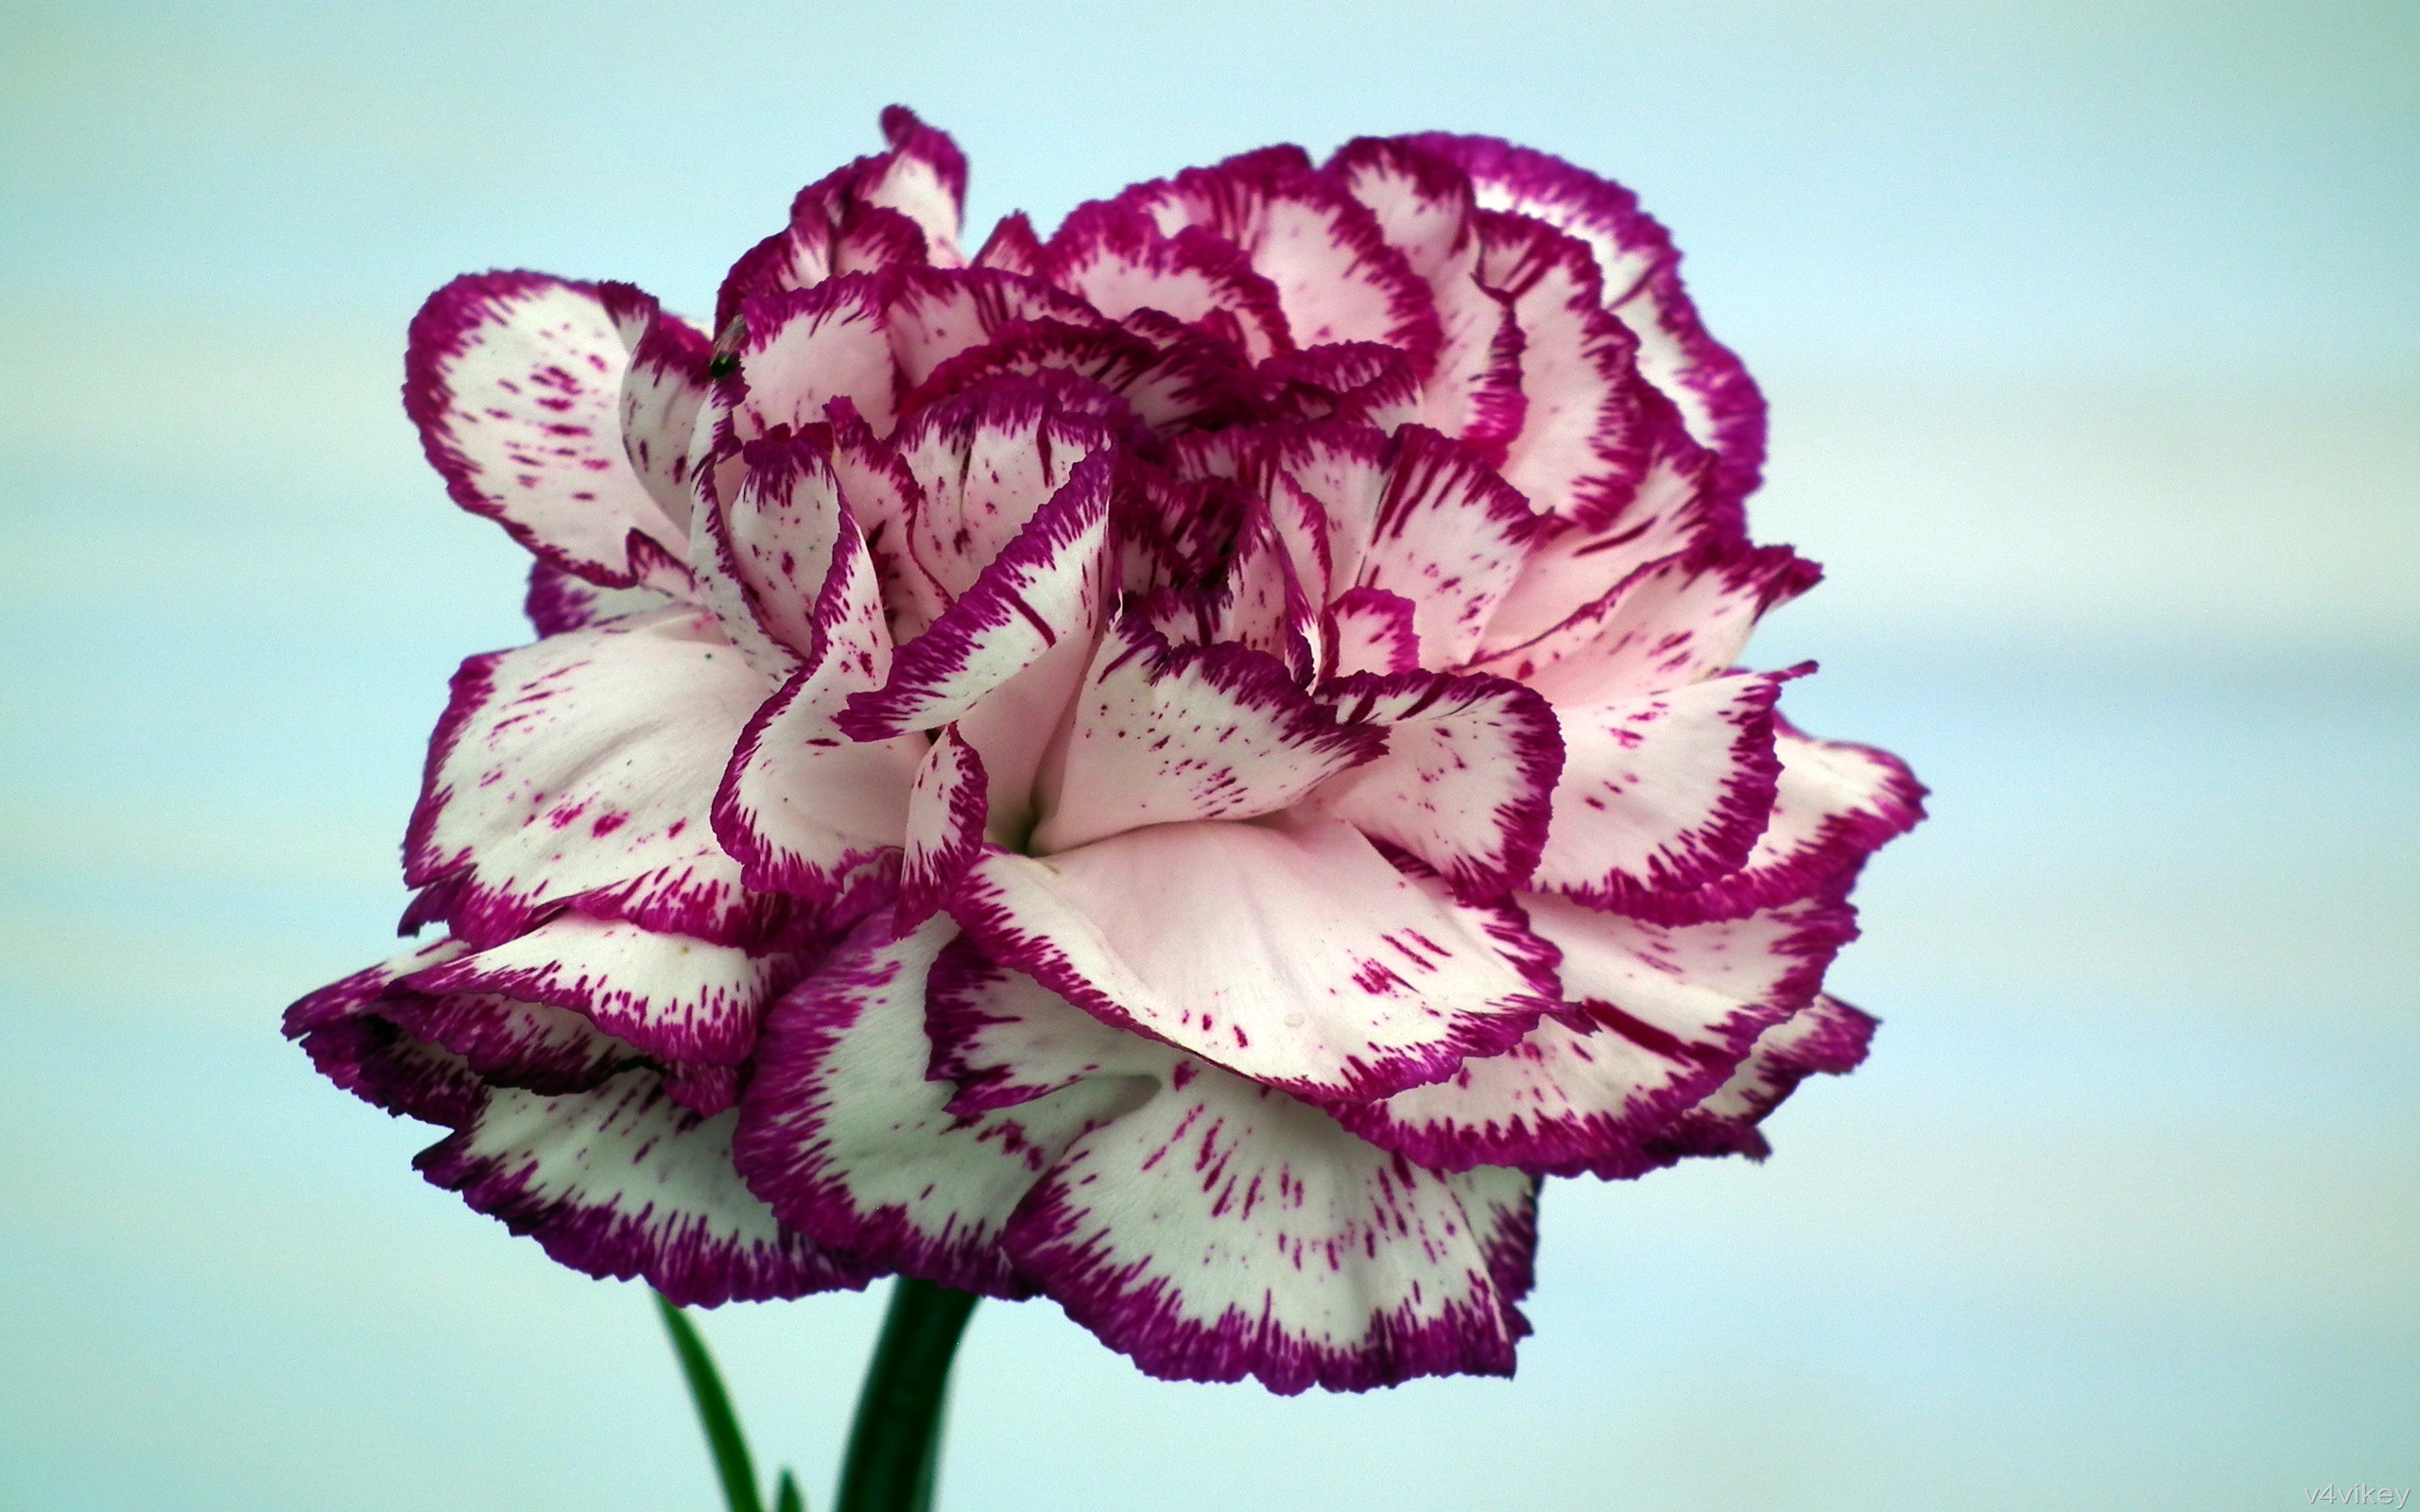 carnation stock photo by dinkyh 8 / 719 white carnation stock photo by anph...